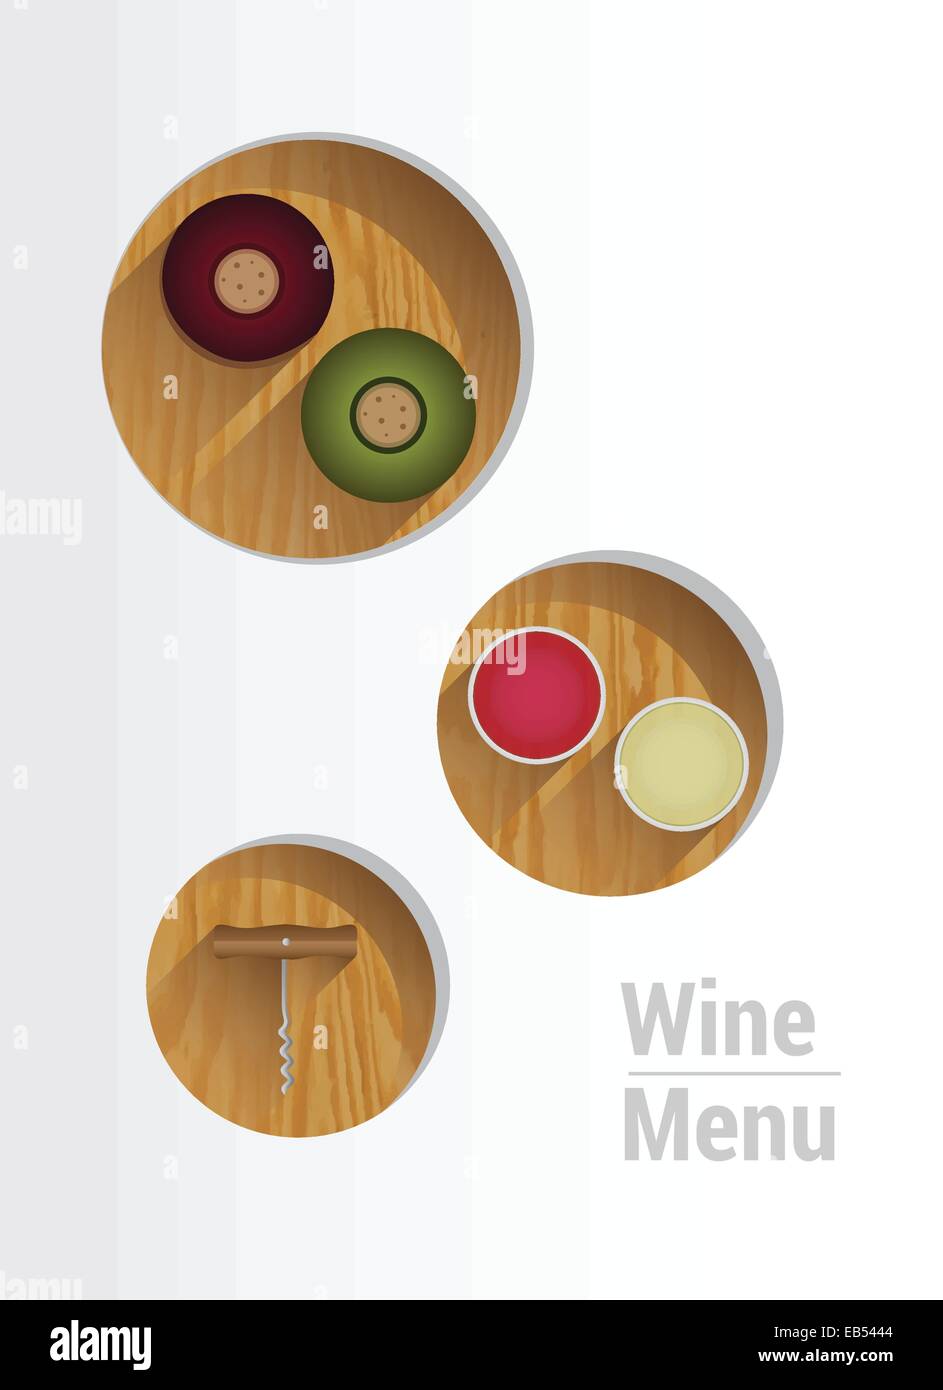 Wine menu with cut out circles showing wine crackers and corkscrew Stock Vector